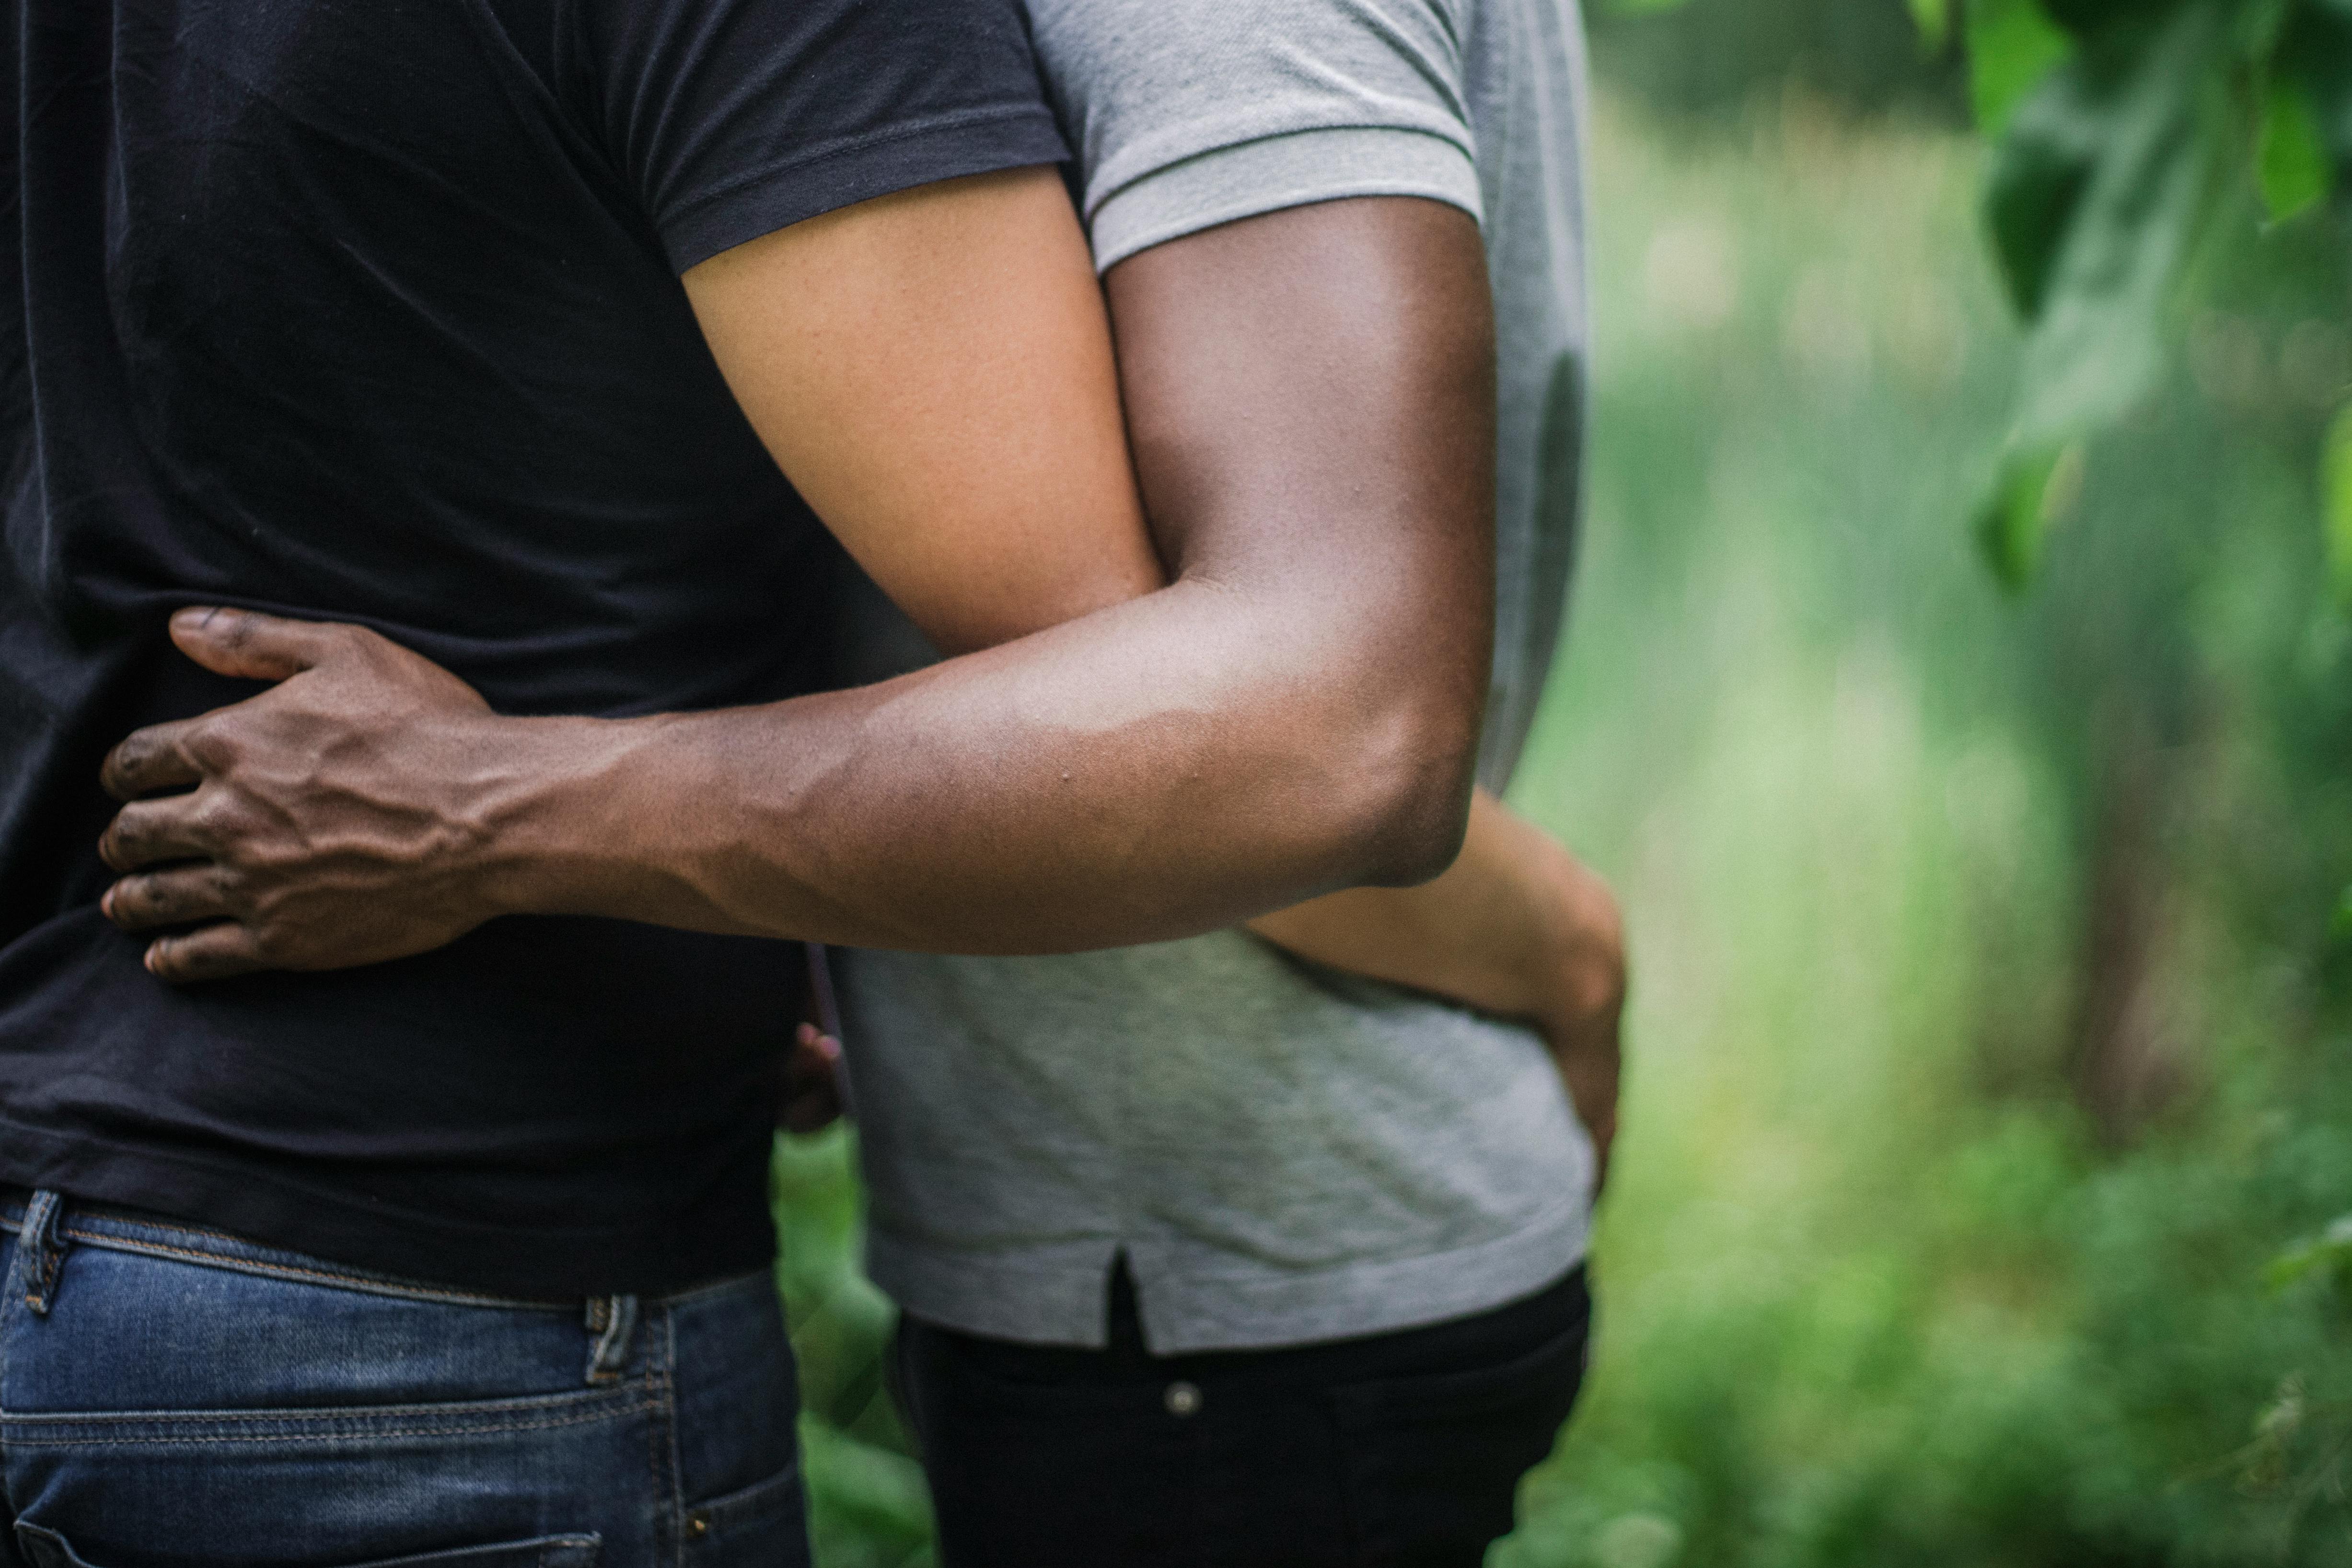 Couple cuddling with affection | Source: Pexels